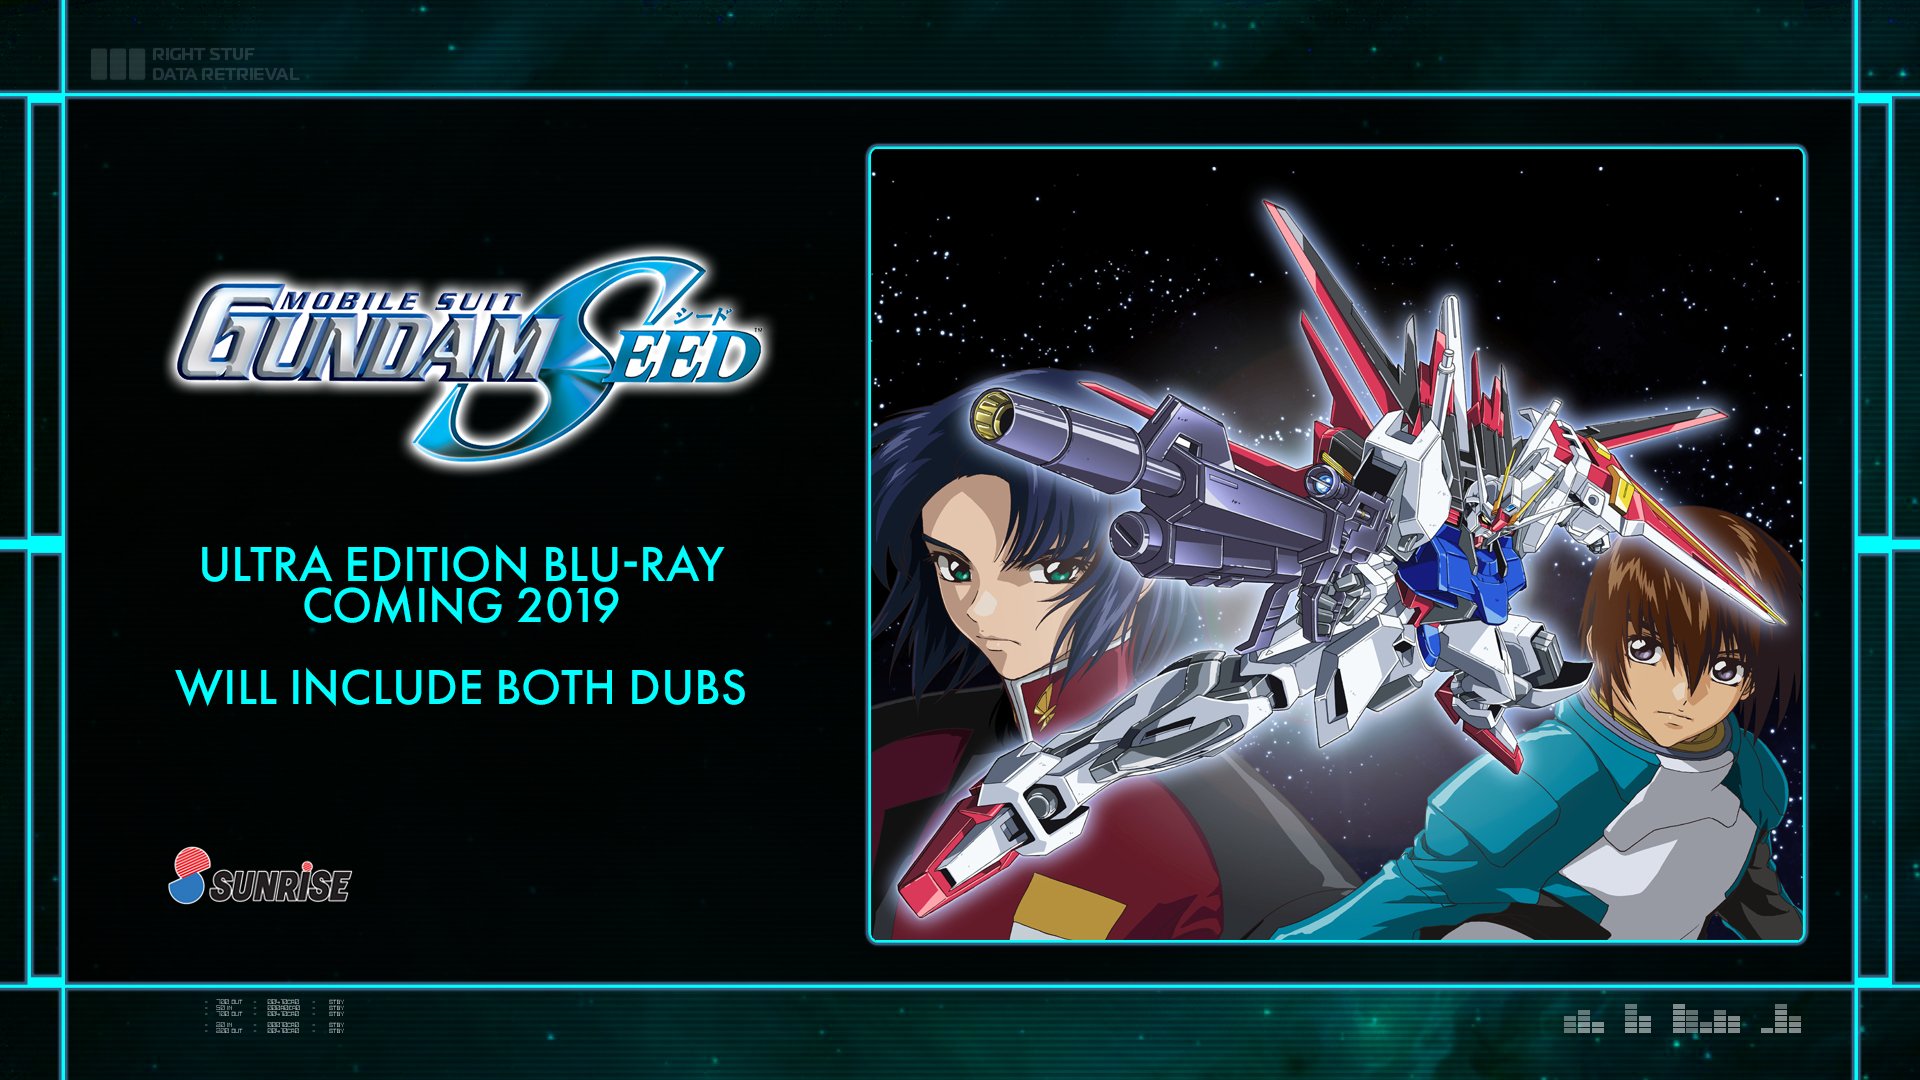 Nozomi Entertainment We Re Making Mobile Suit Gundam Seed Seed Destiny Ultra Edition Blu Ray Set What Would You Like To See In It Let Us Know By Replying To This